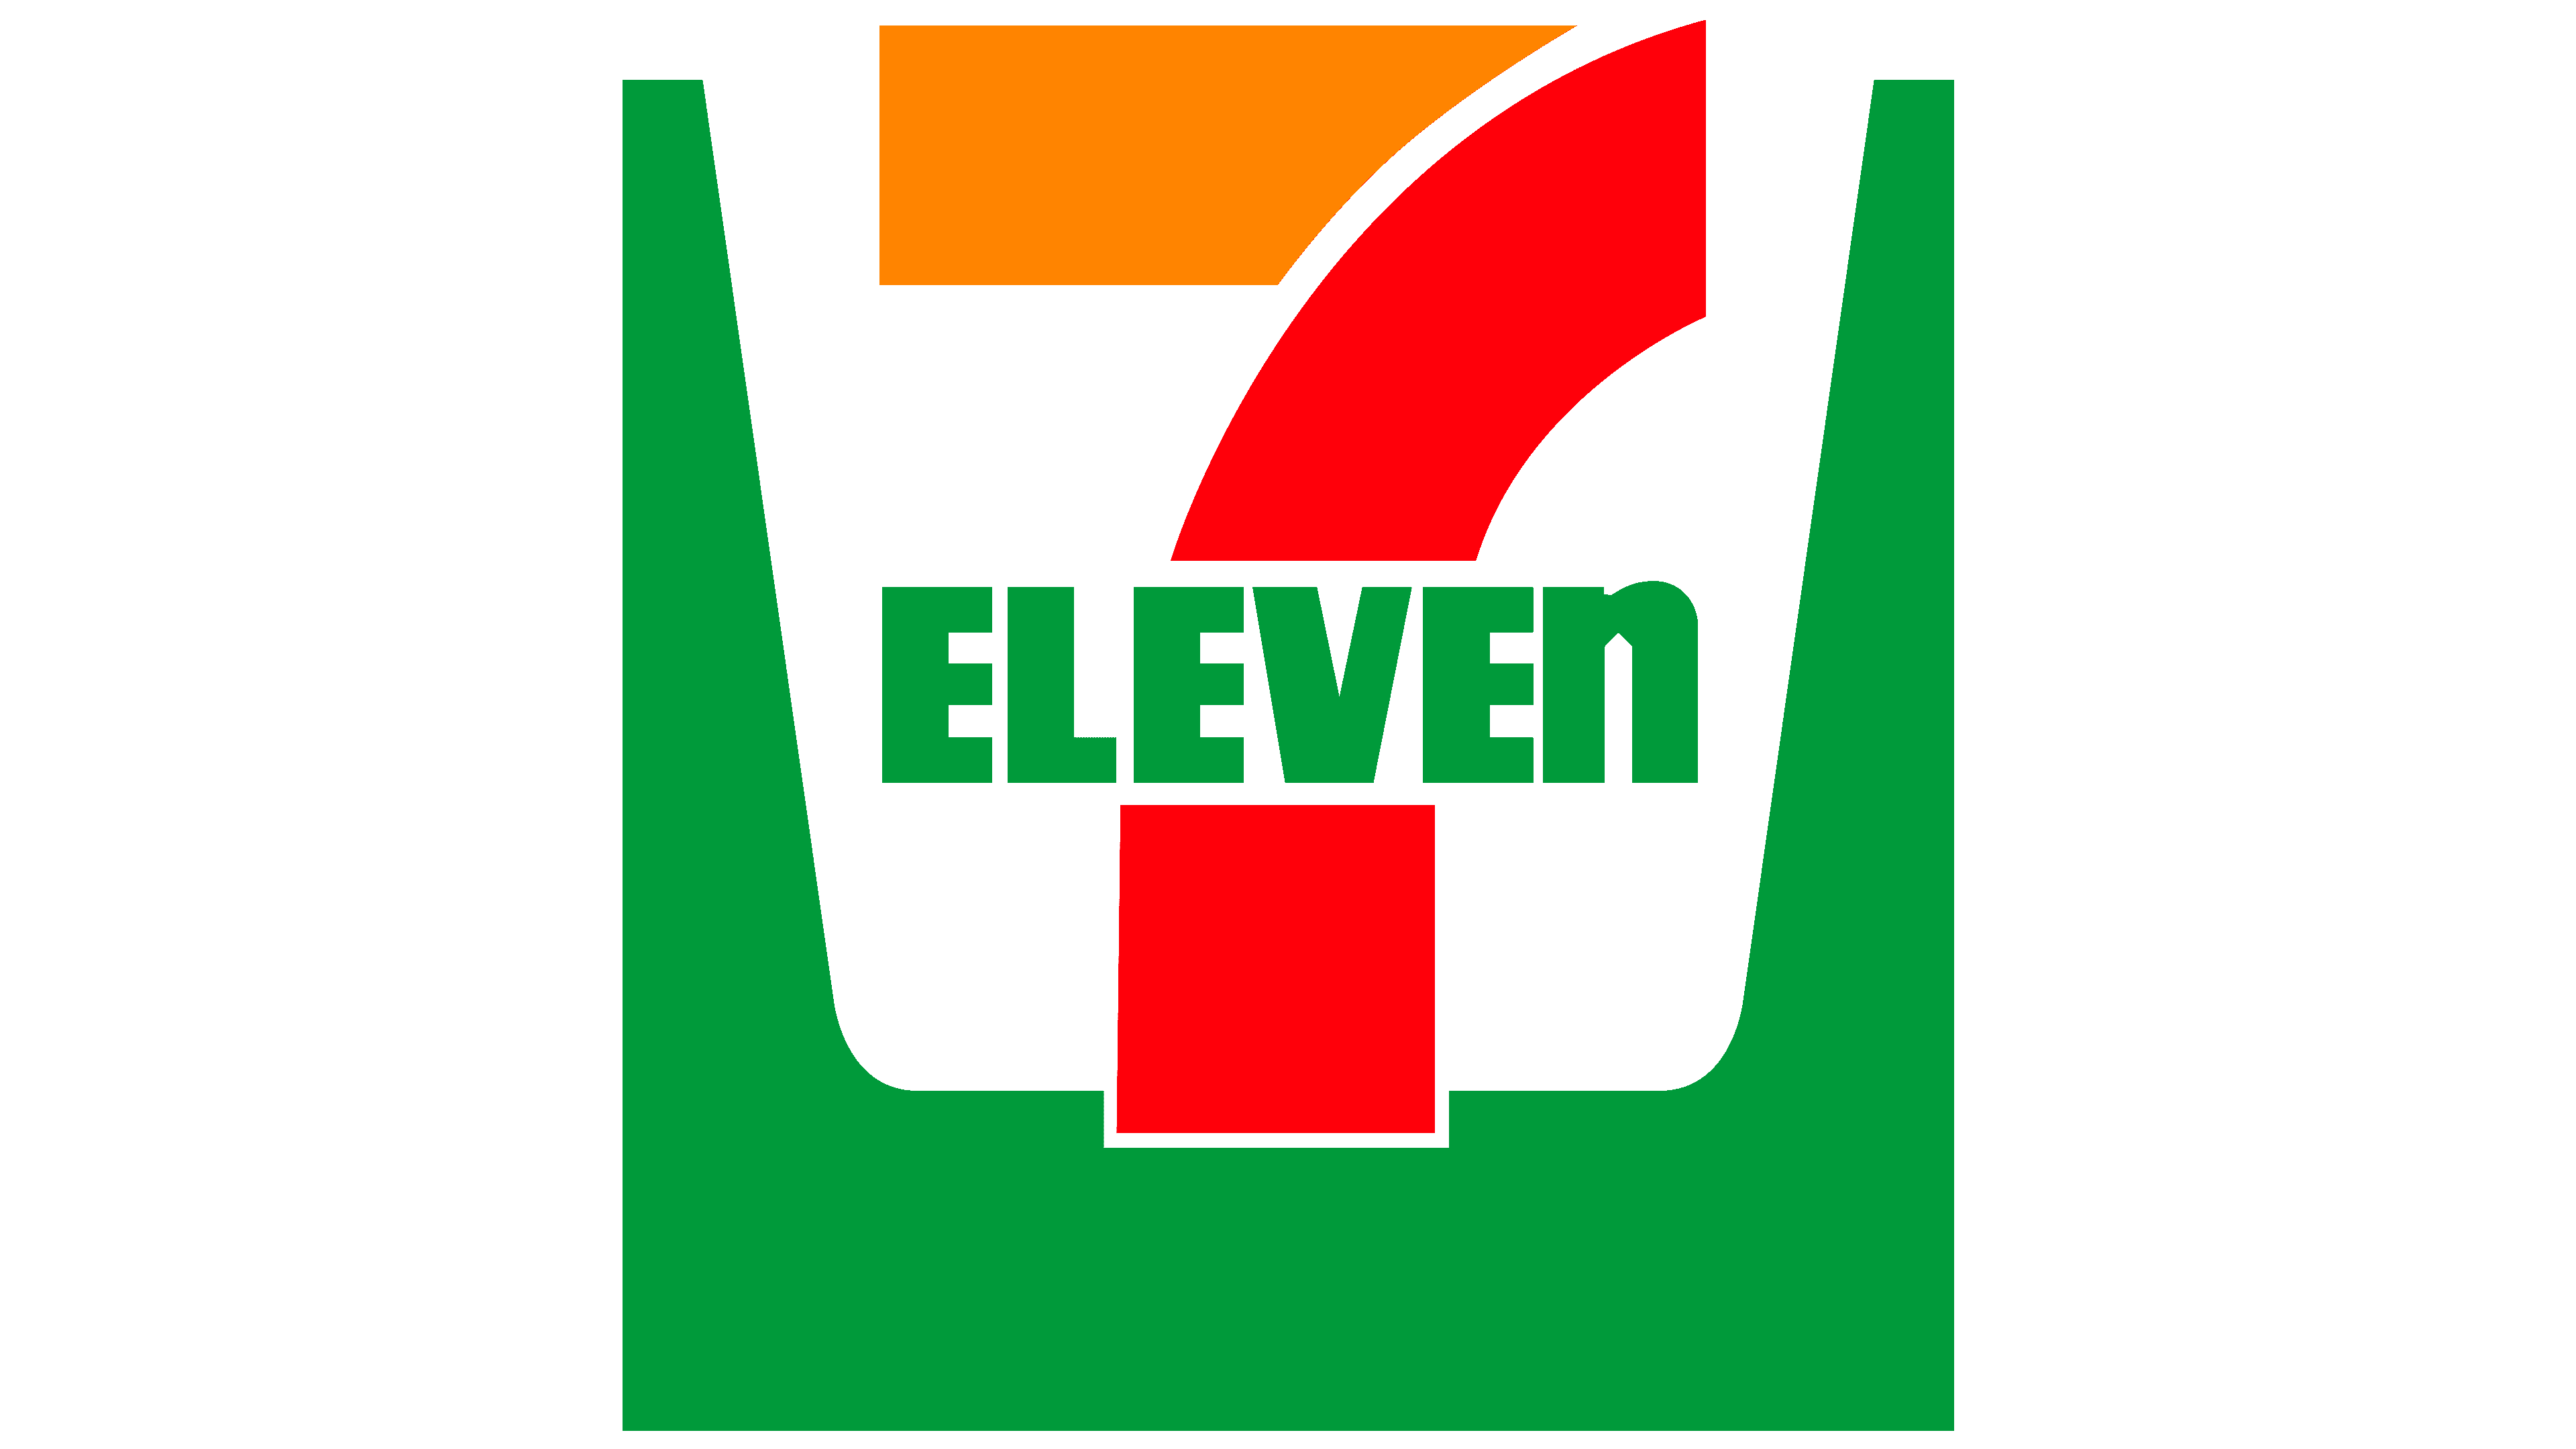 7 Eleven Logo, symbol, meaning, history, PNG, brand